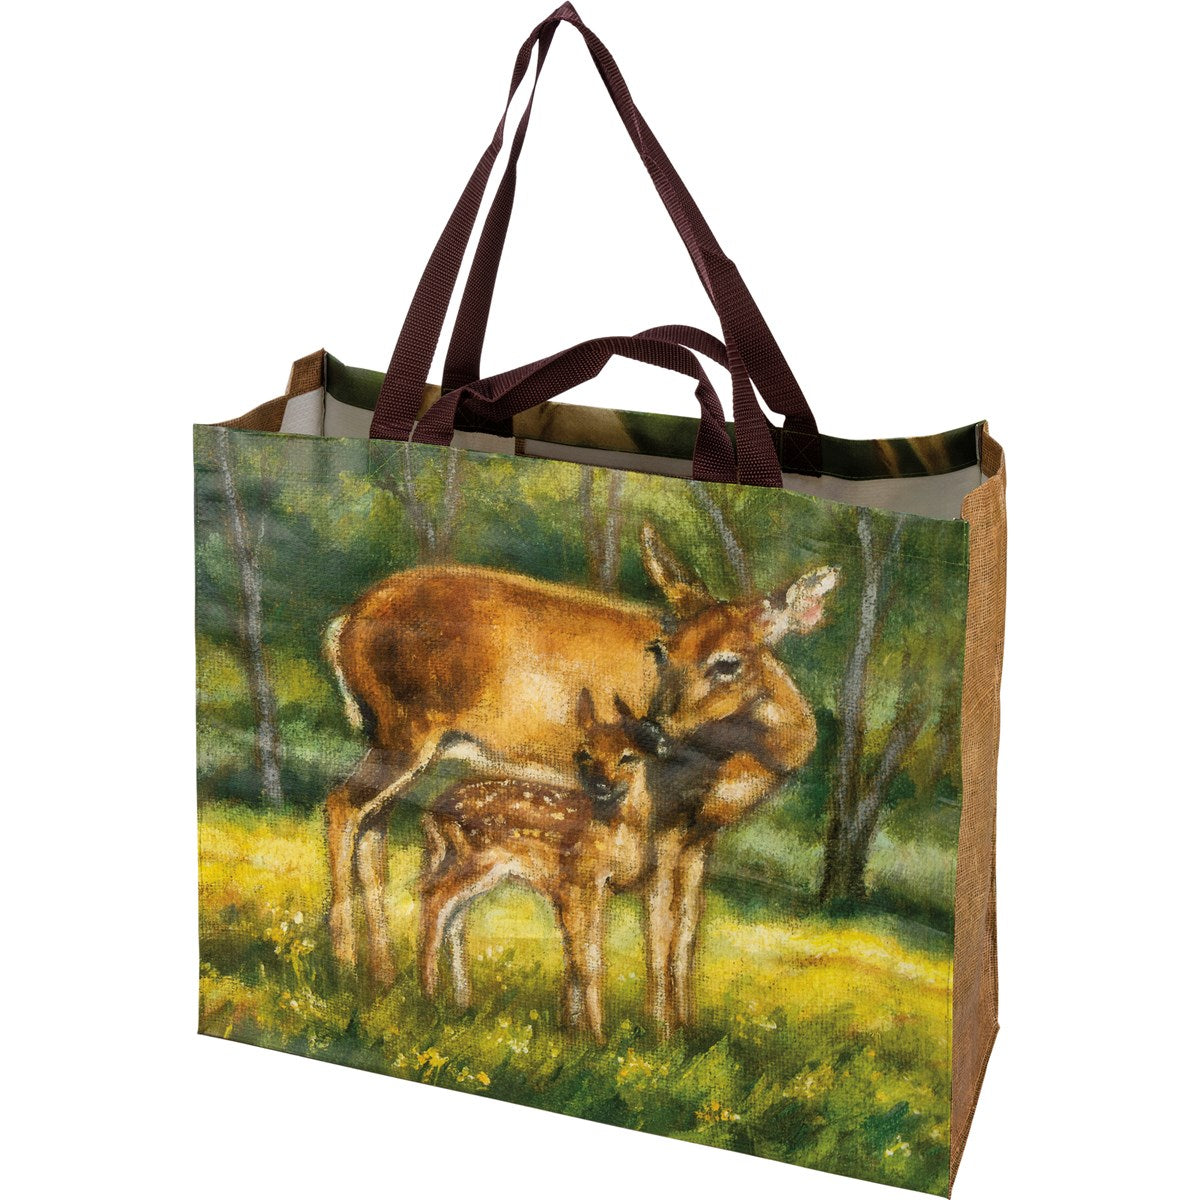 Woodland Deer and Moose Reusable Shopping Tote